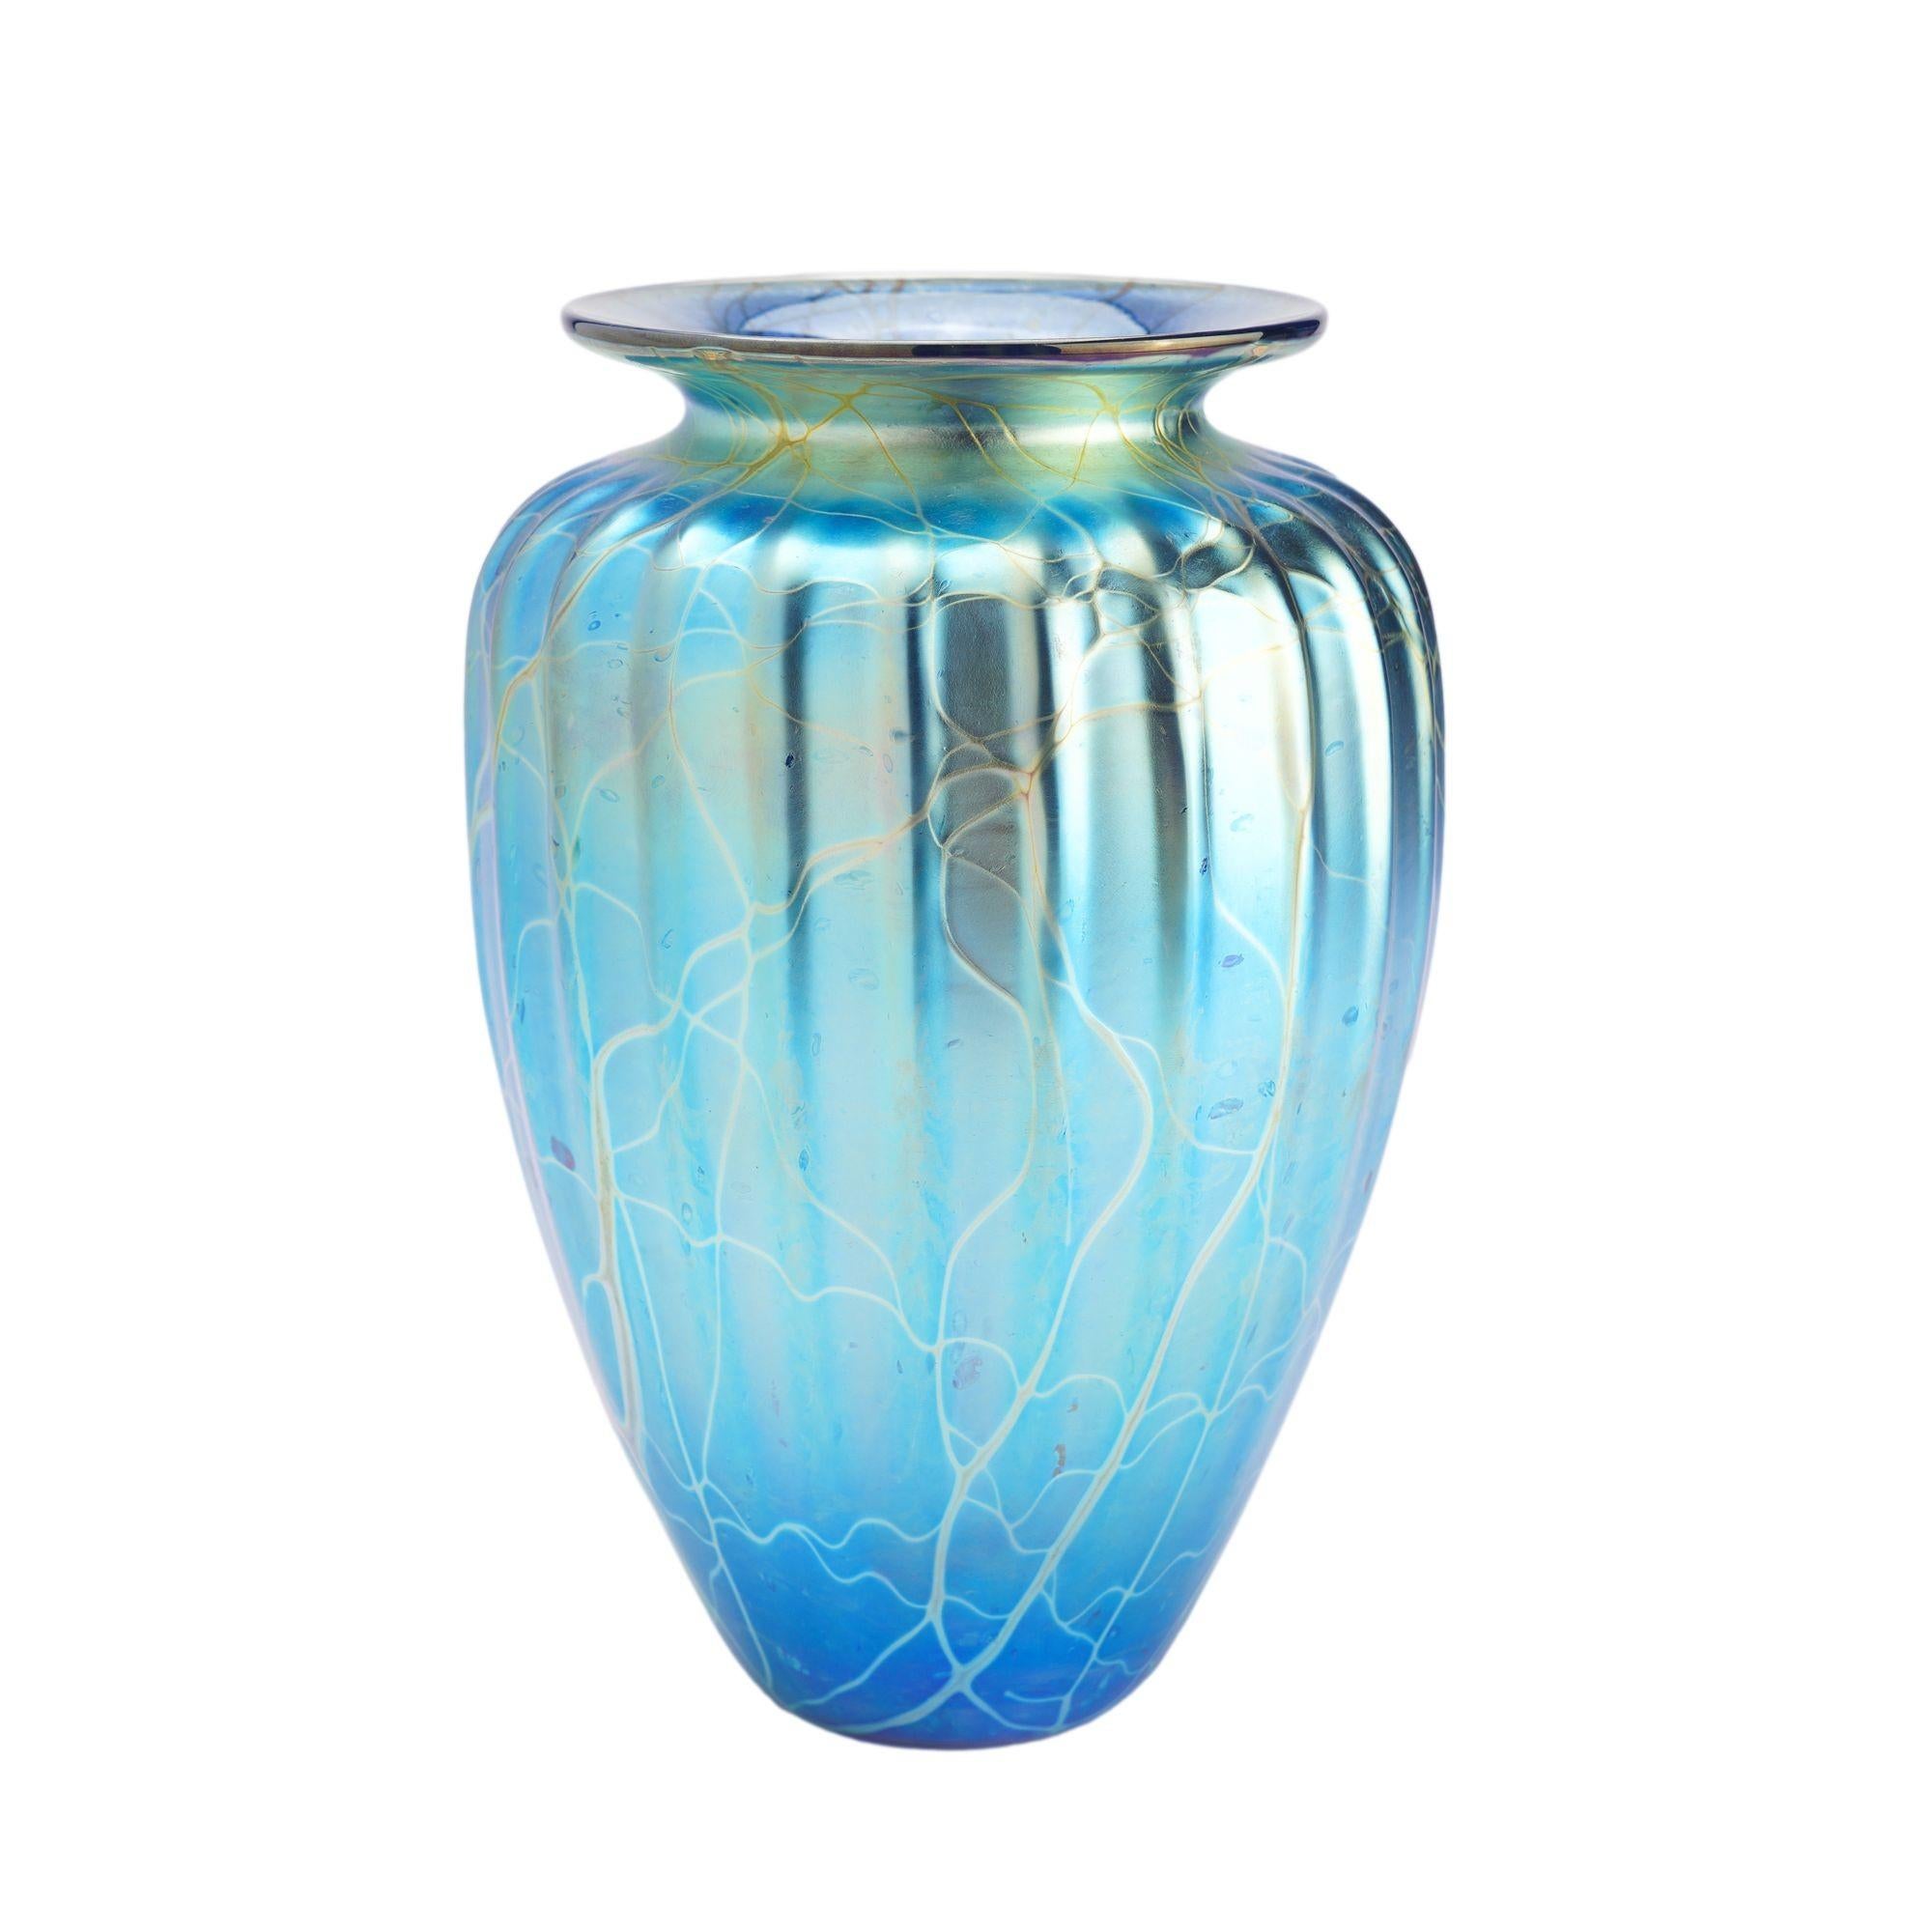 Iridescent blown glass vase with a tapered and fluted body, and waisted, flaring rim. The iridescence fades from a deep metallic blue-green at the top to a rich blue-purple at the bottom of the vase. Undertones of green, brown, and purple